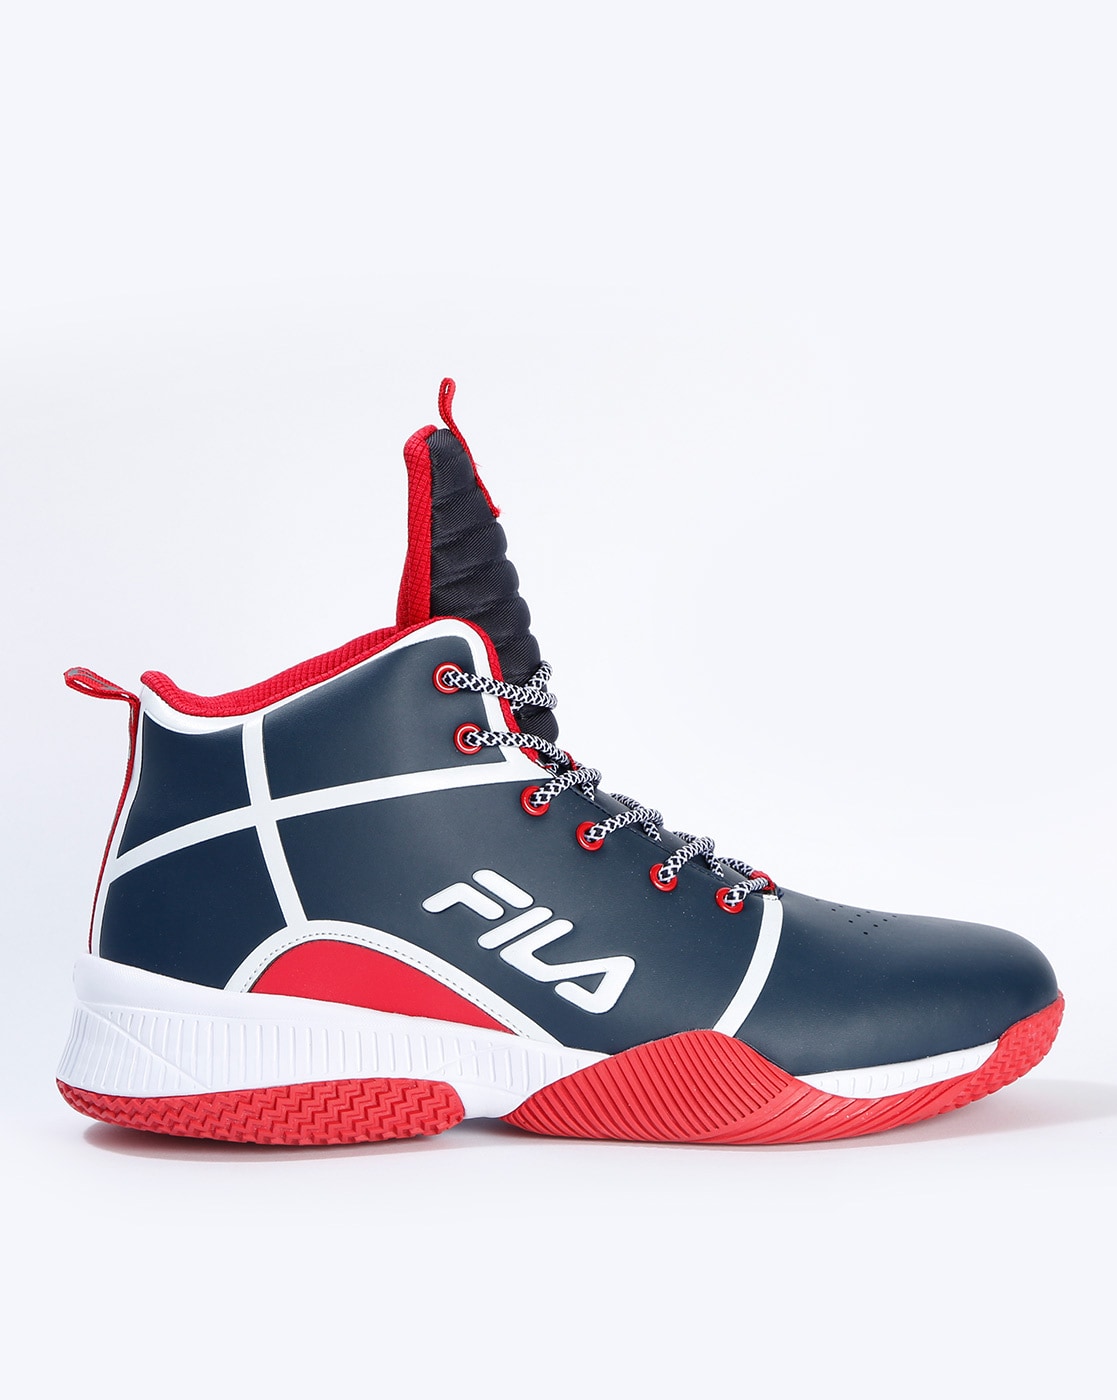 fila red basketball shoes